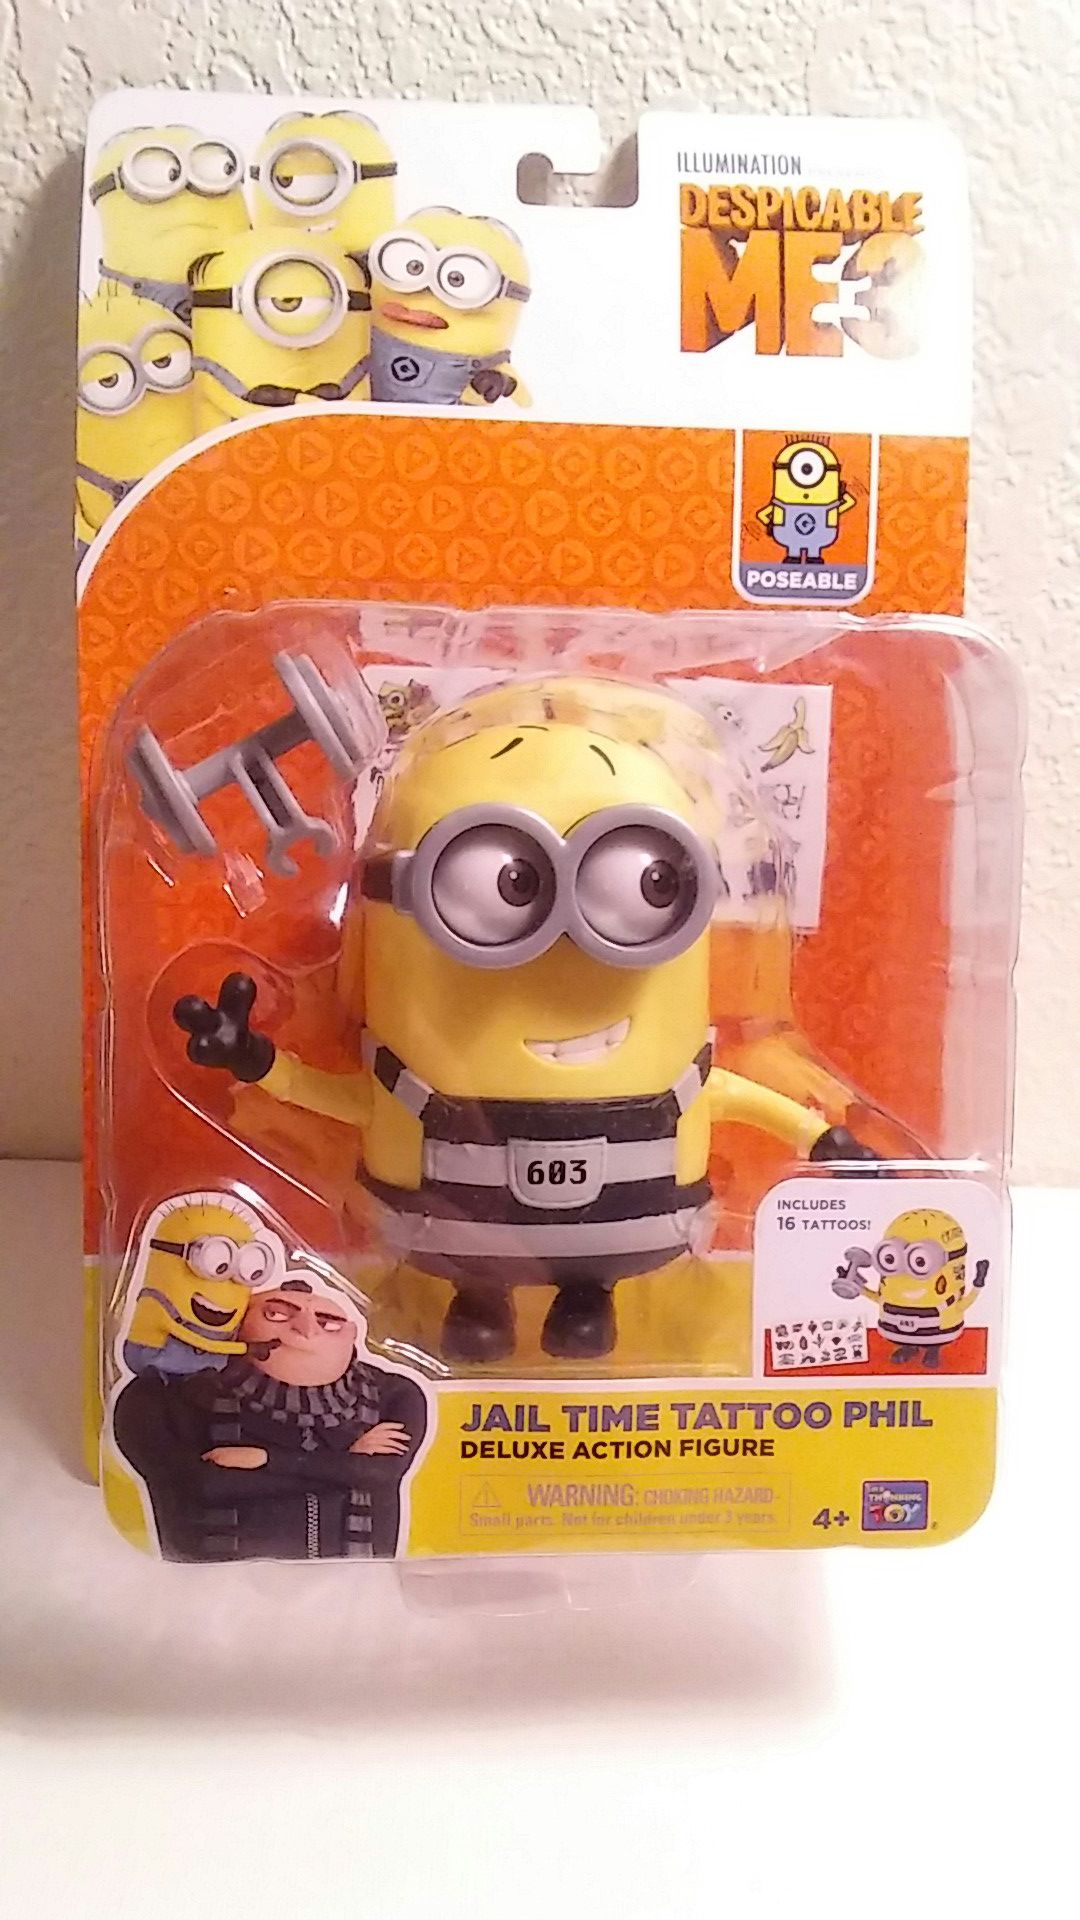 Minions Despicable Me 3 Deluxe Poseable Action Figure Jail Time Tattoo Phil